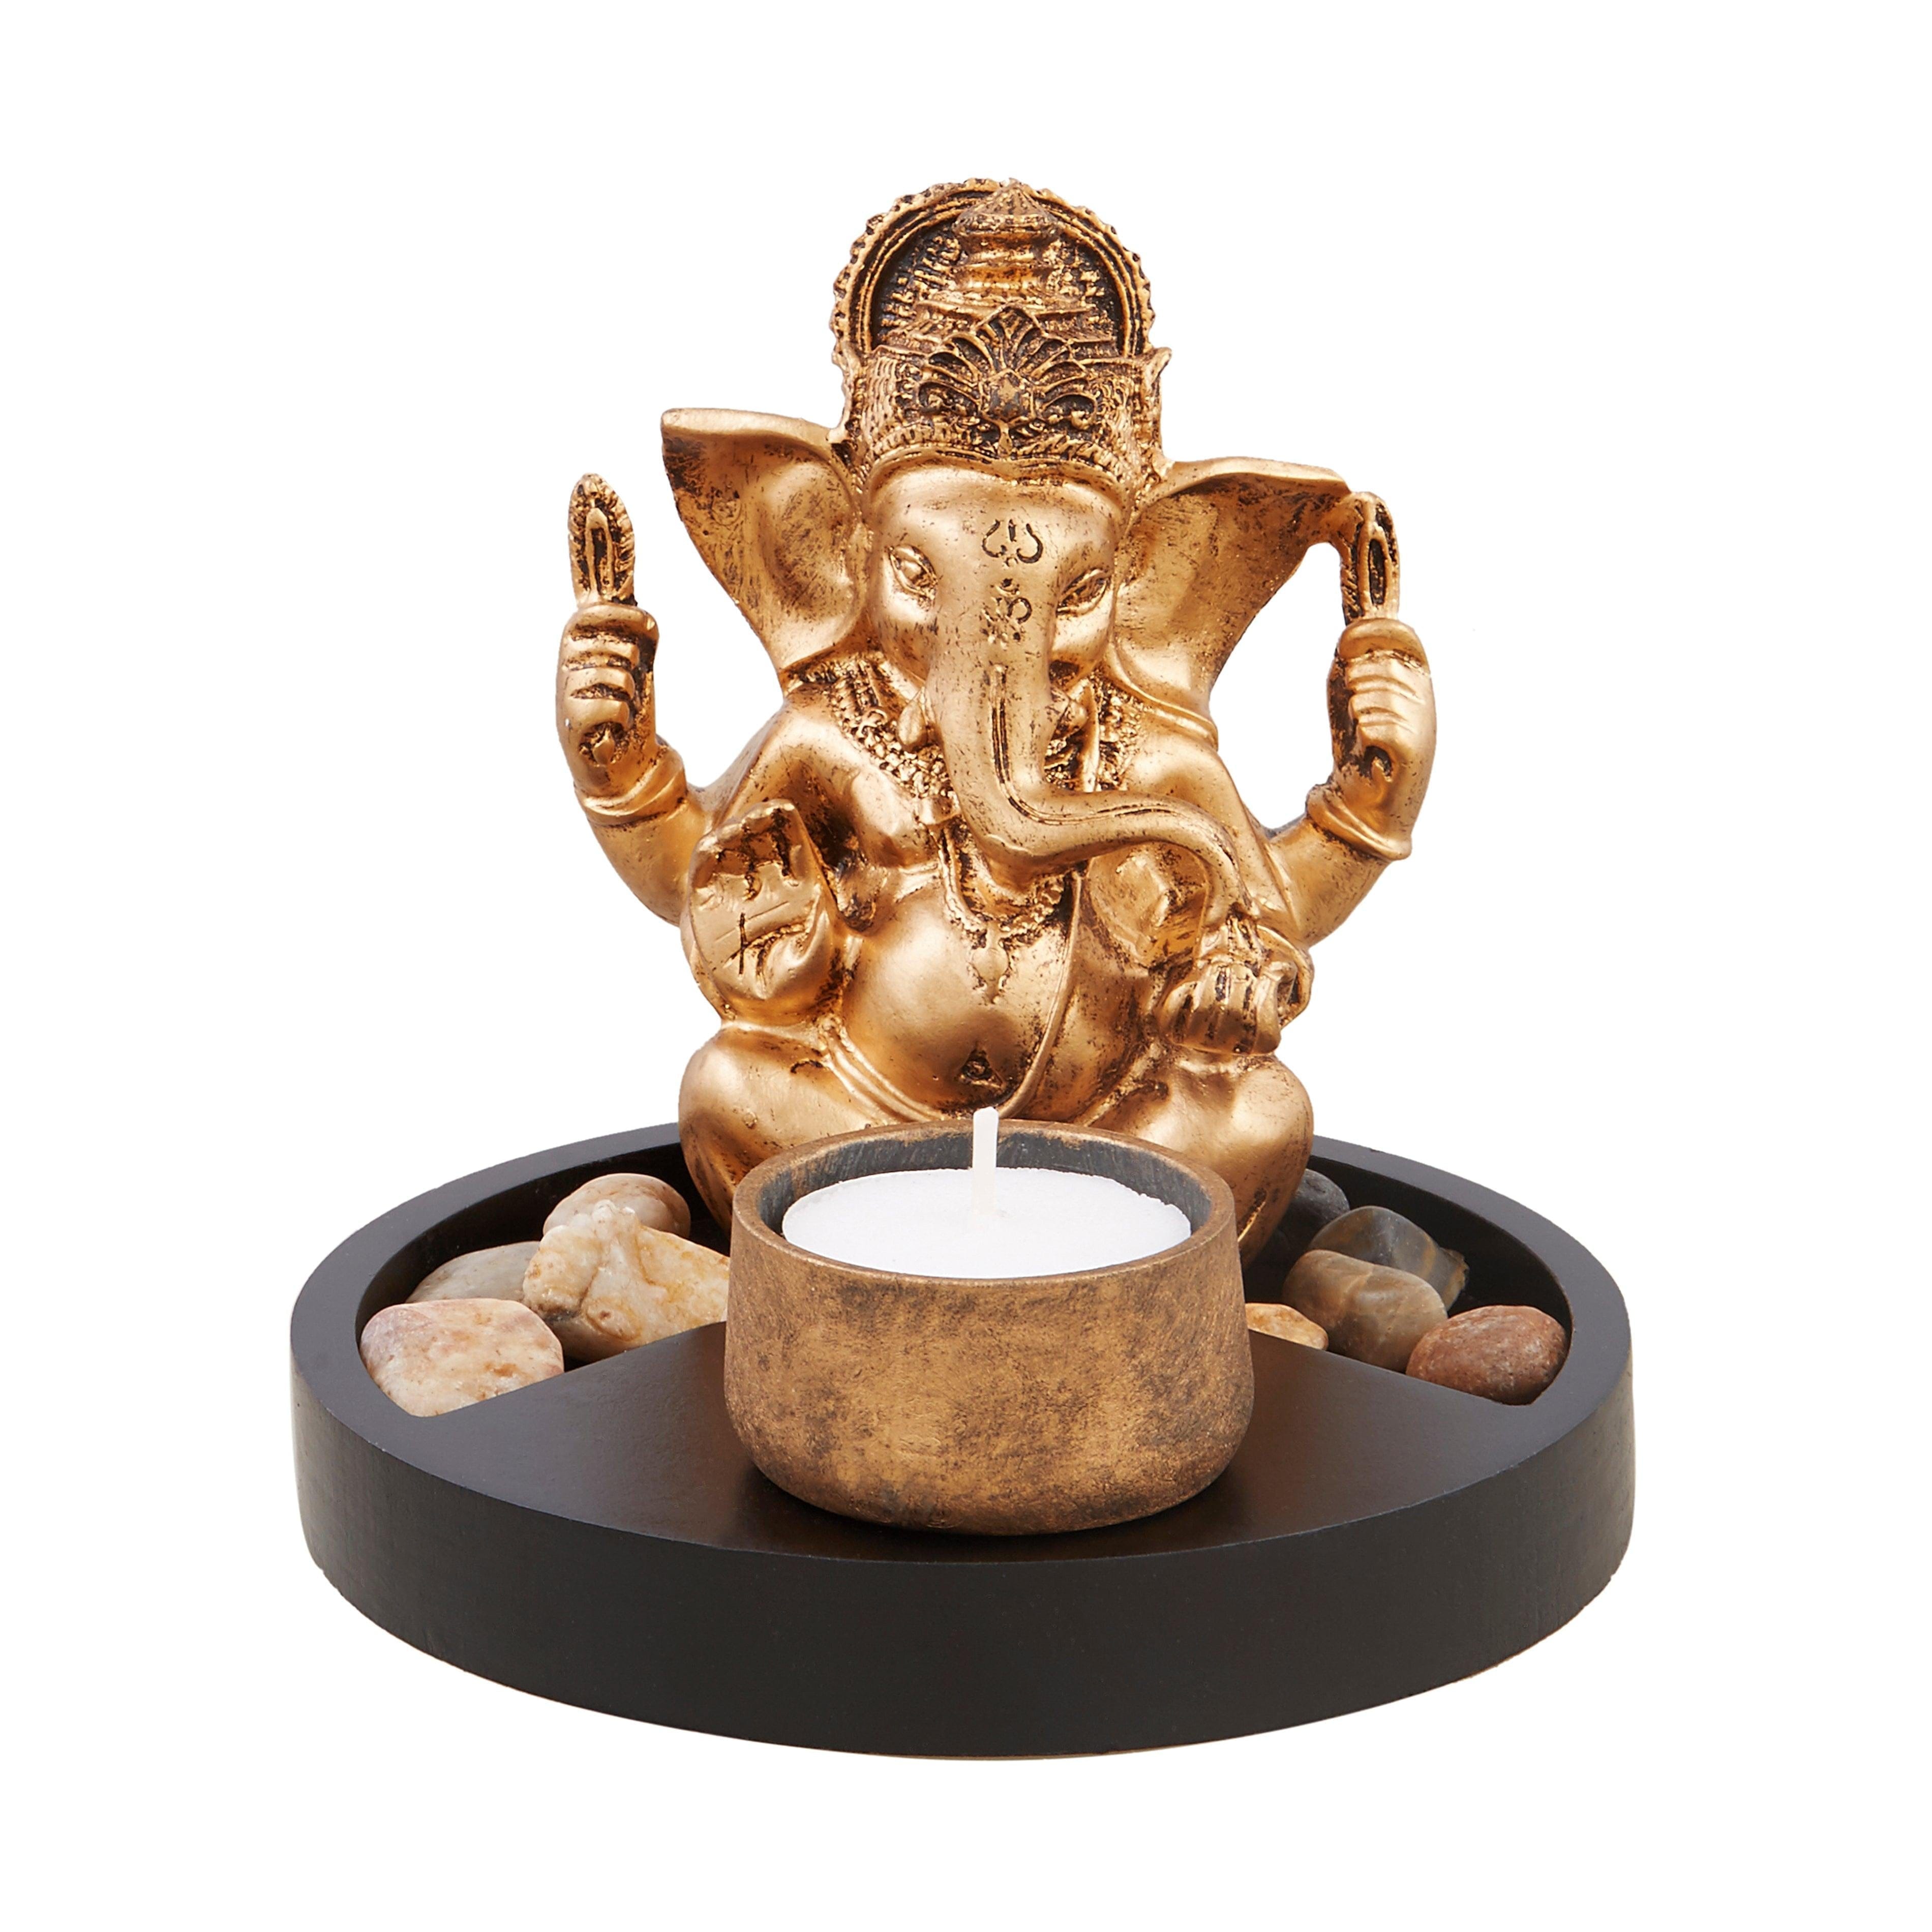 Lord Ganesha with Candle Holder on Wooden Tray Gift Set